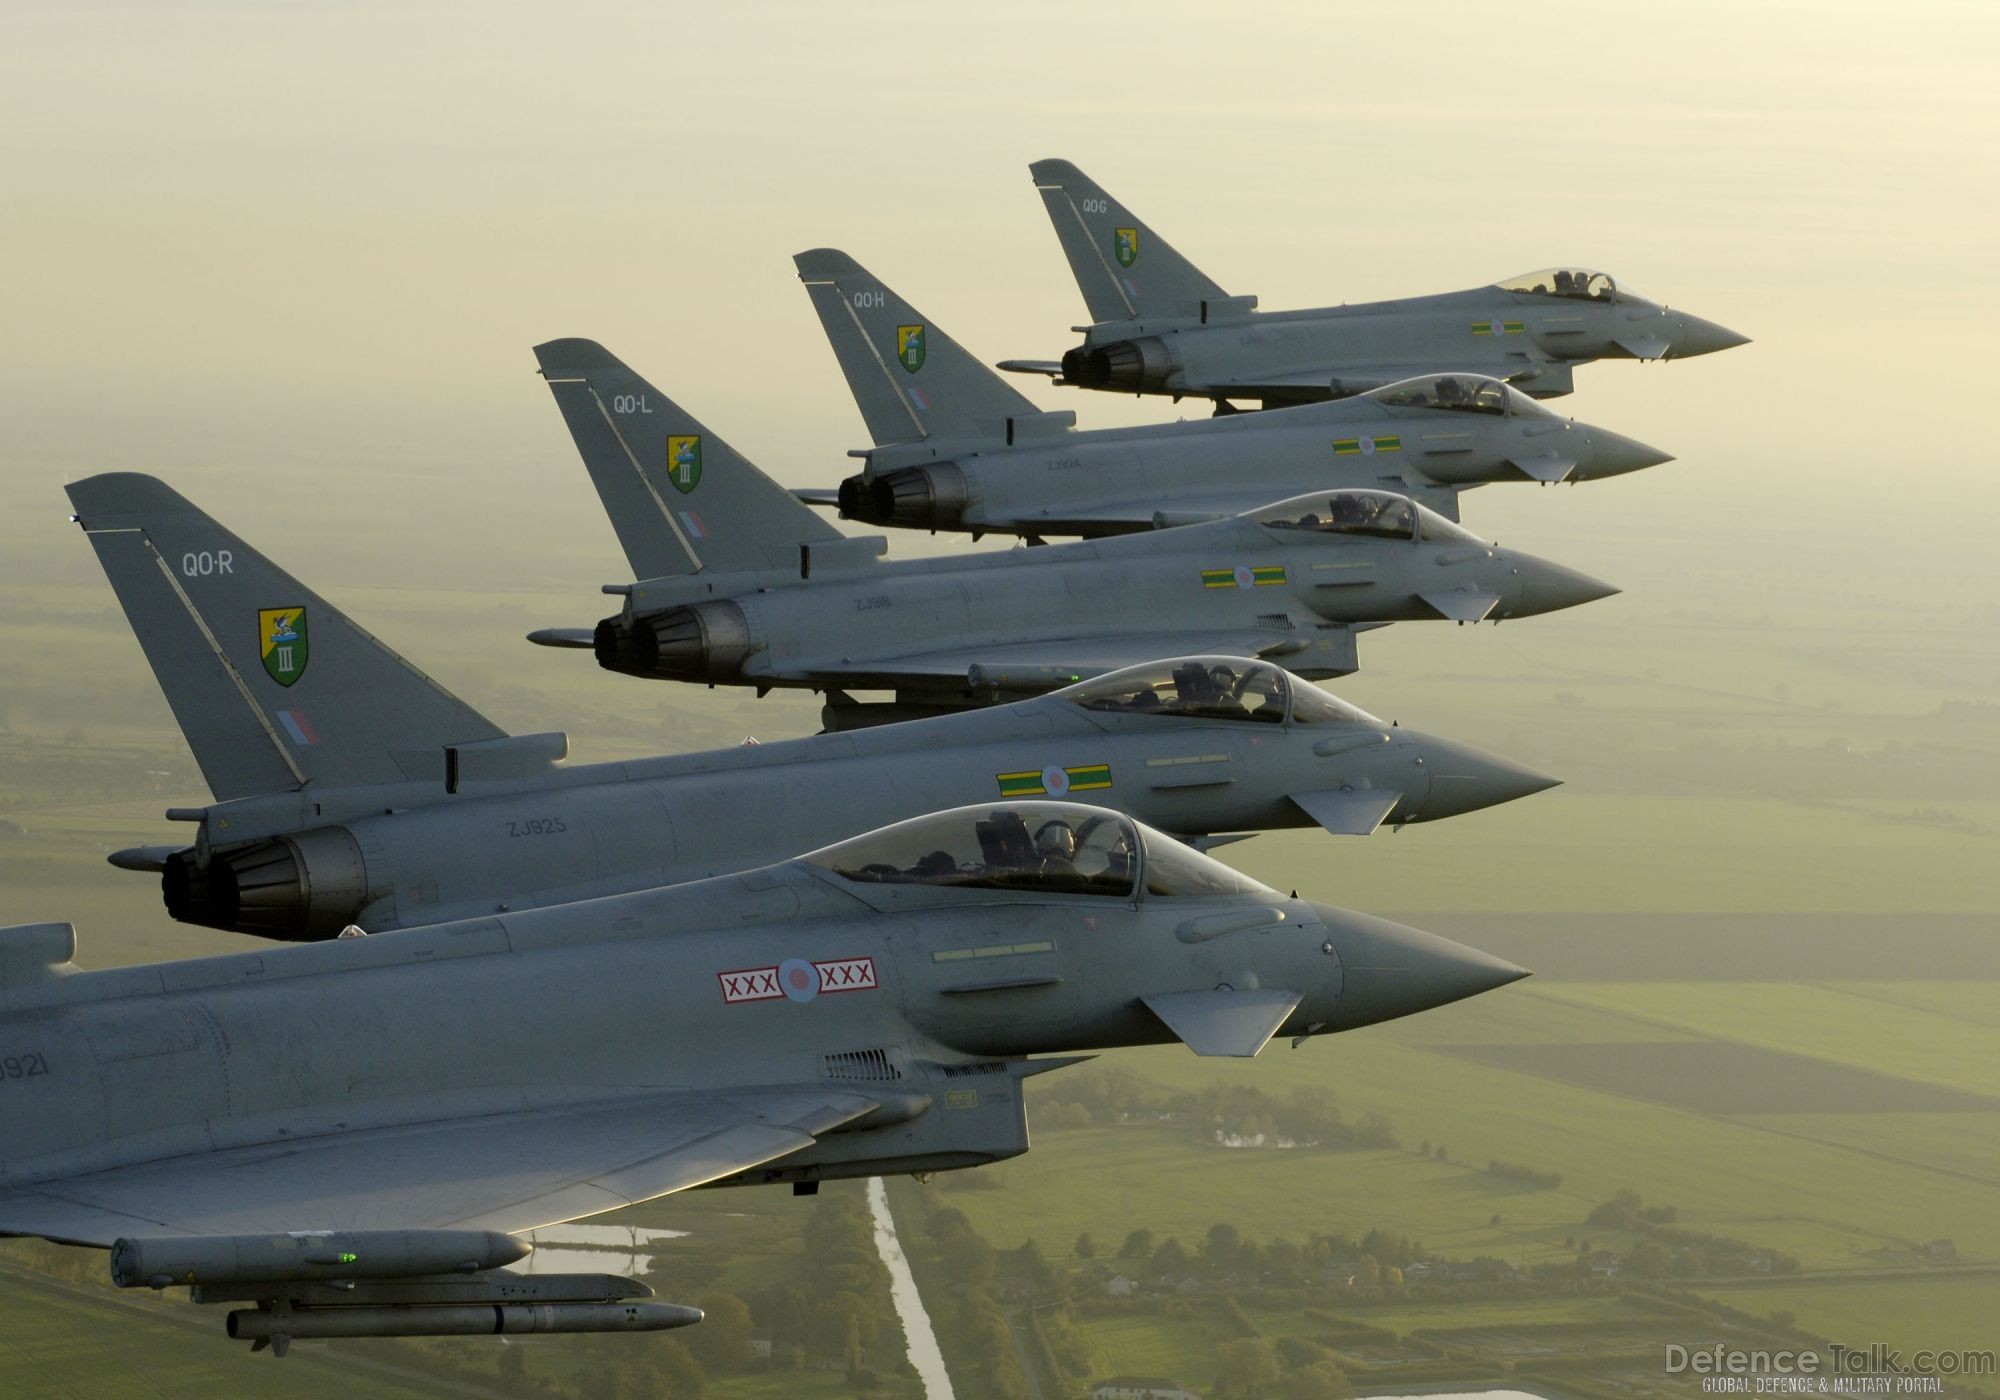 Eurofighter Typhoon - Military Fighter Aircraft Wallpaper | Defence Forum &  Military Photos - DefenceTalk